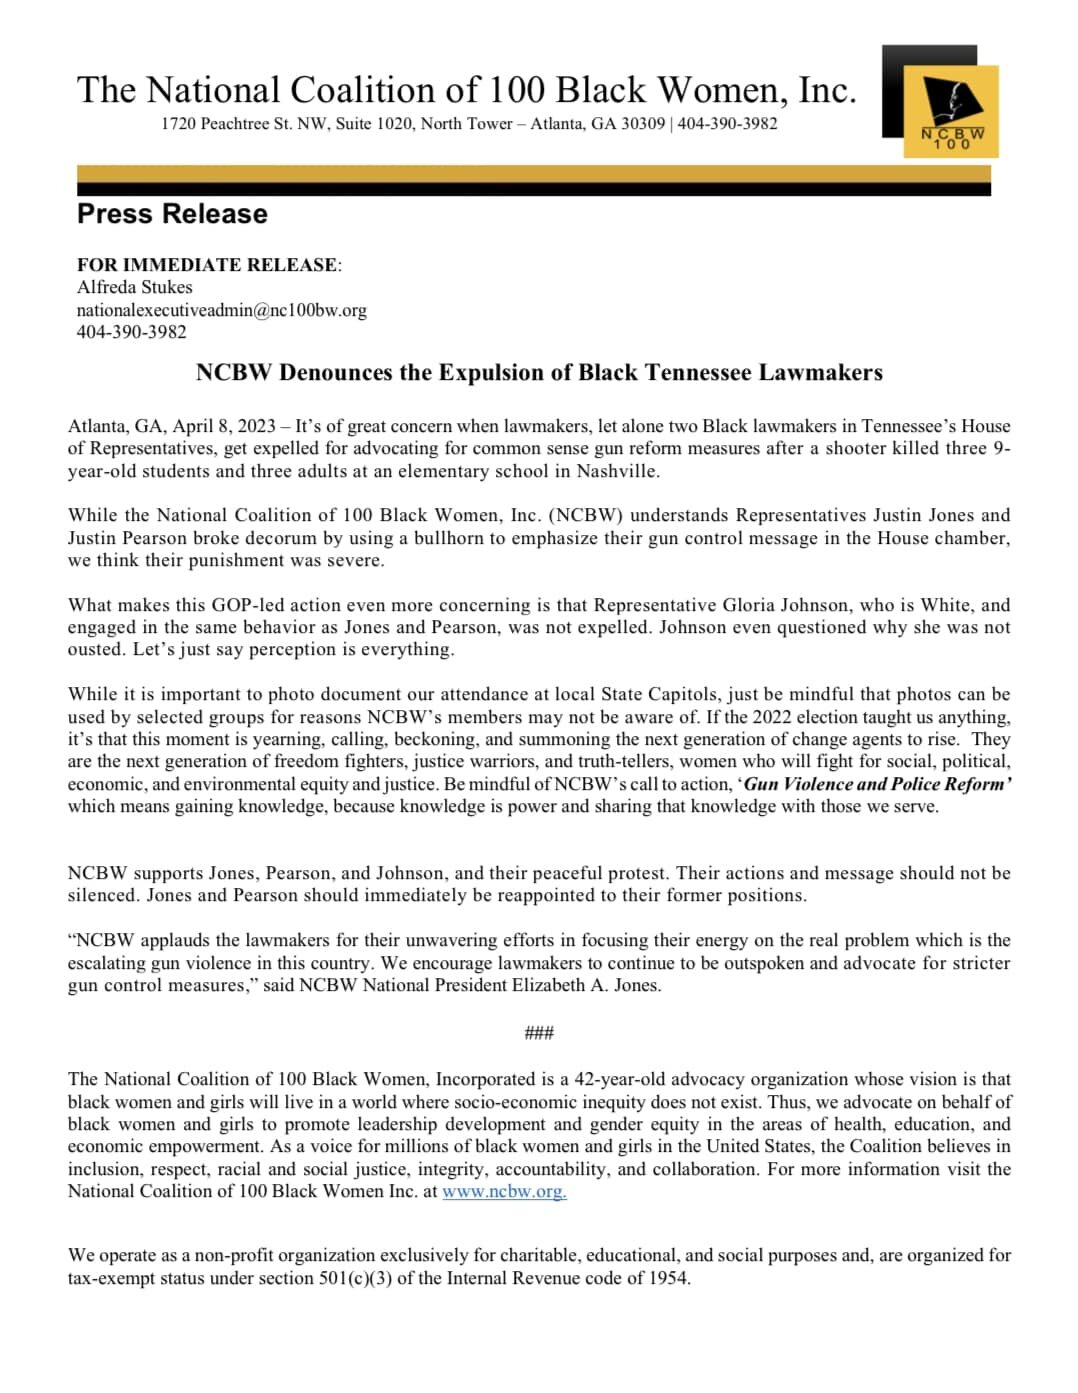 NCBW Denounces the Expulsion of Black Tennessee Lawmakers // NCBW supports Tennessee State Representatives Justin Jones, Justin Pearson, and Gloria Johnson for their unwavering efforts in focusing their energy on the real problem which is the escalat